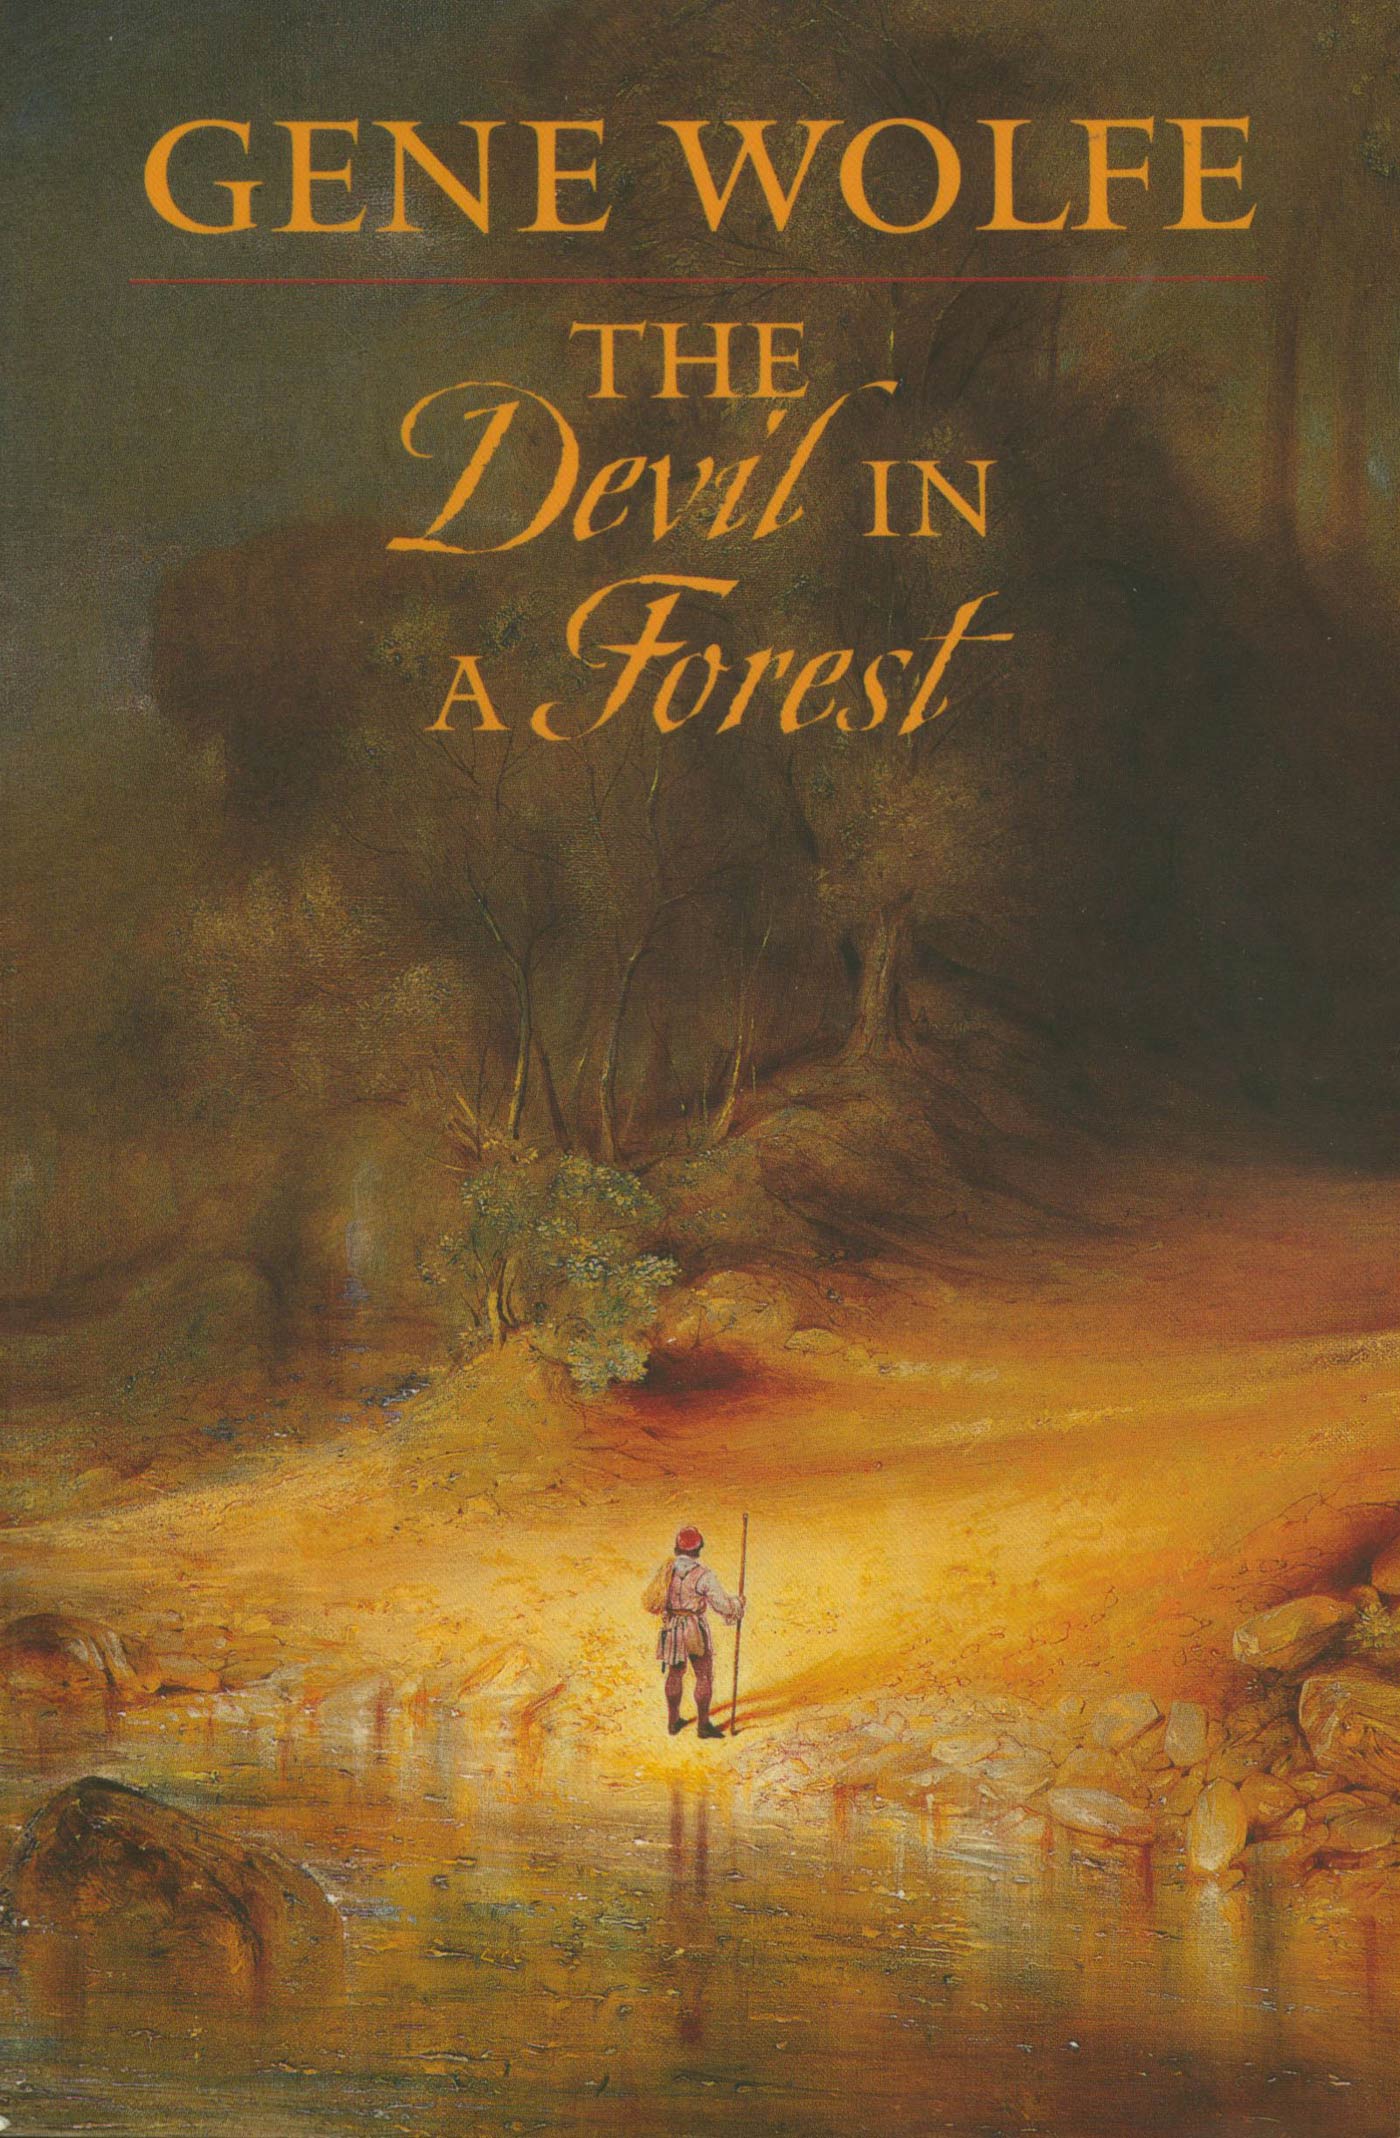 The Devil In A Forest by Gene Wolfe